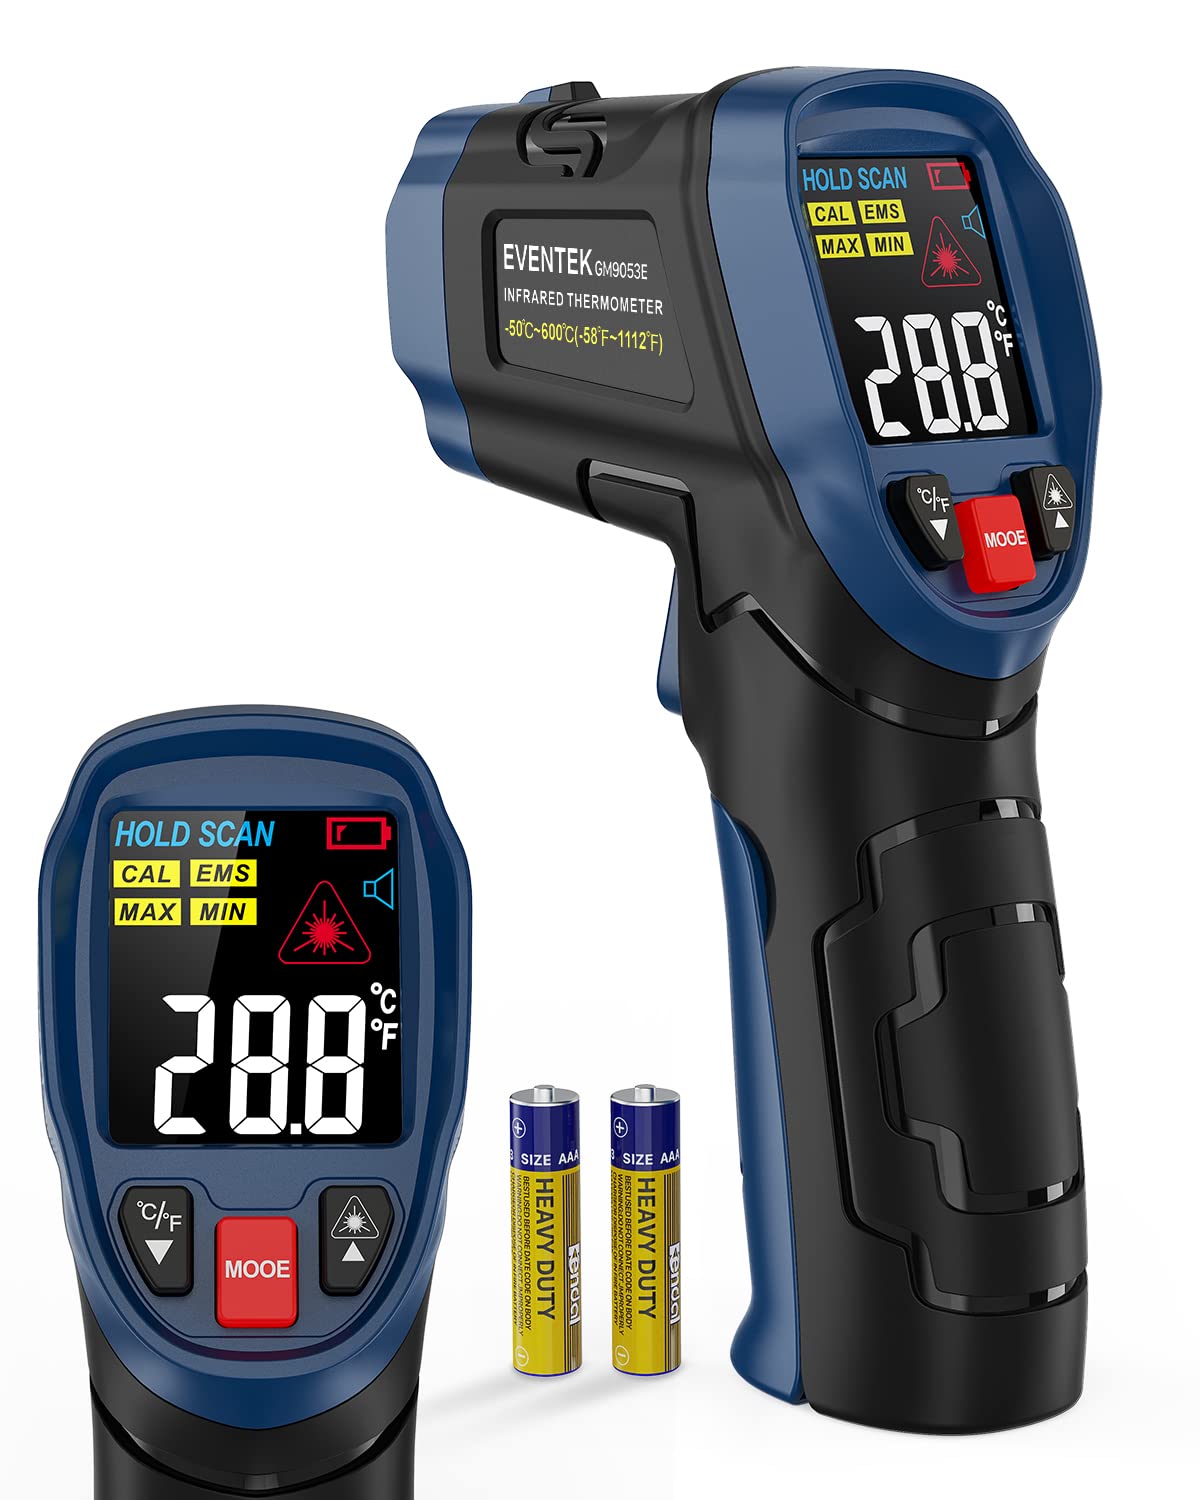 Eventek Infrared Thermometer, -50°C~600°C [...]